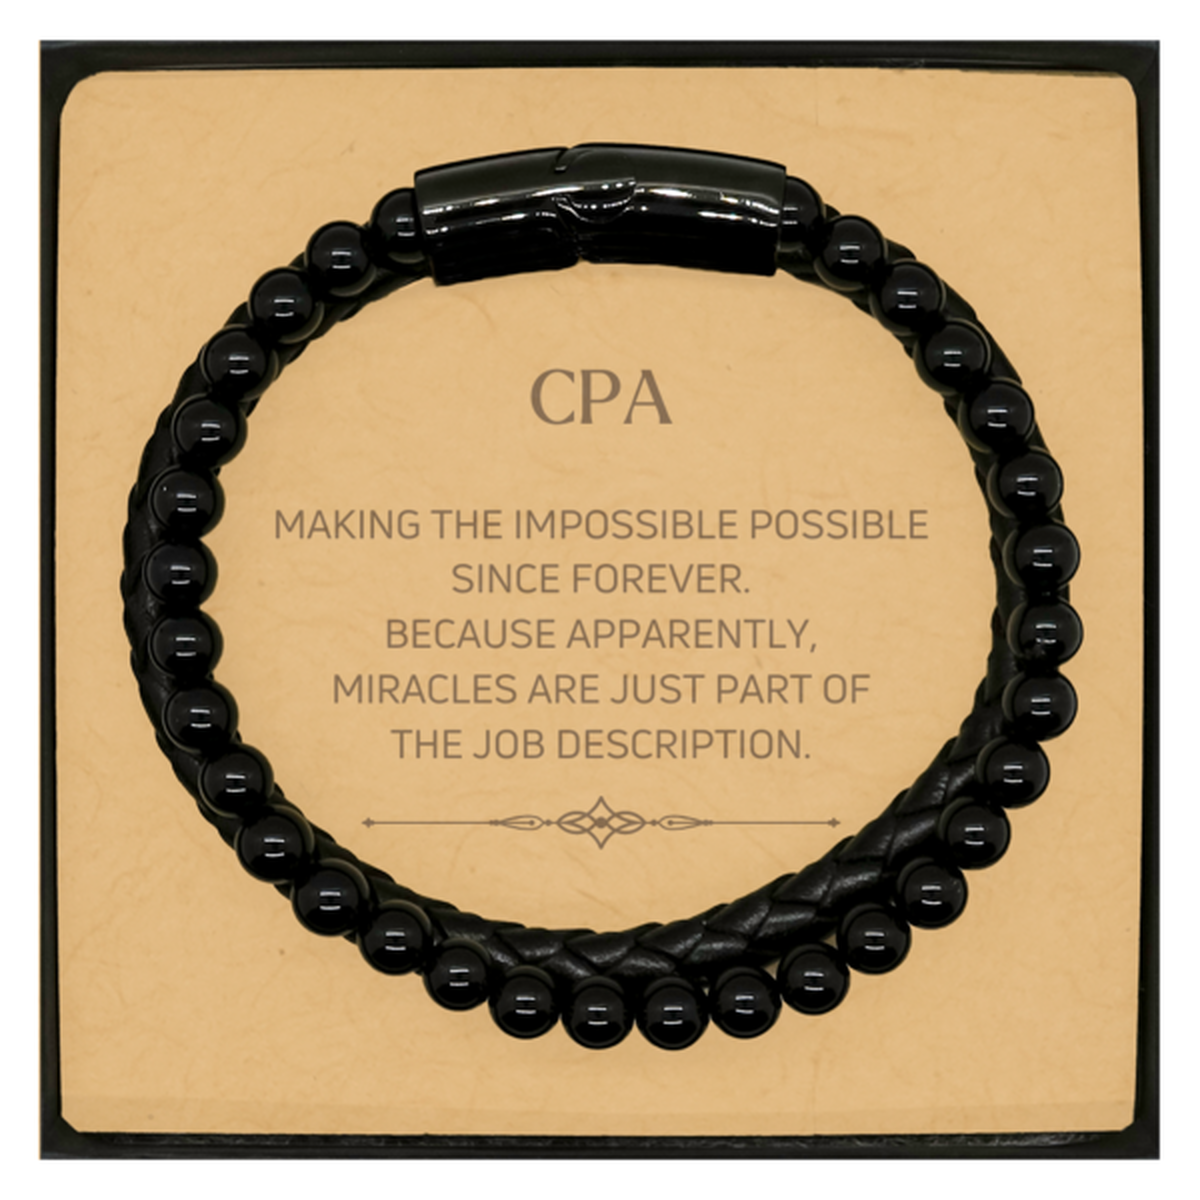 Funny CPA Gifts, Miracles are just part of the job description, Inspirational Birthday Christmas Stone Leather Bracelets For CPA, Men, Women, Coworkers, Friends, Boss